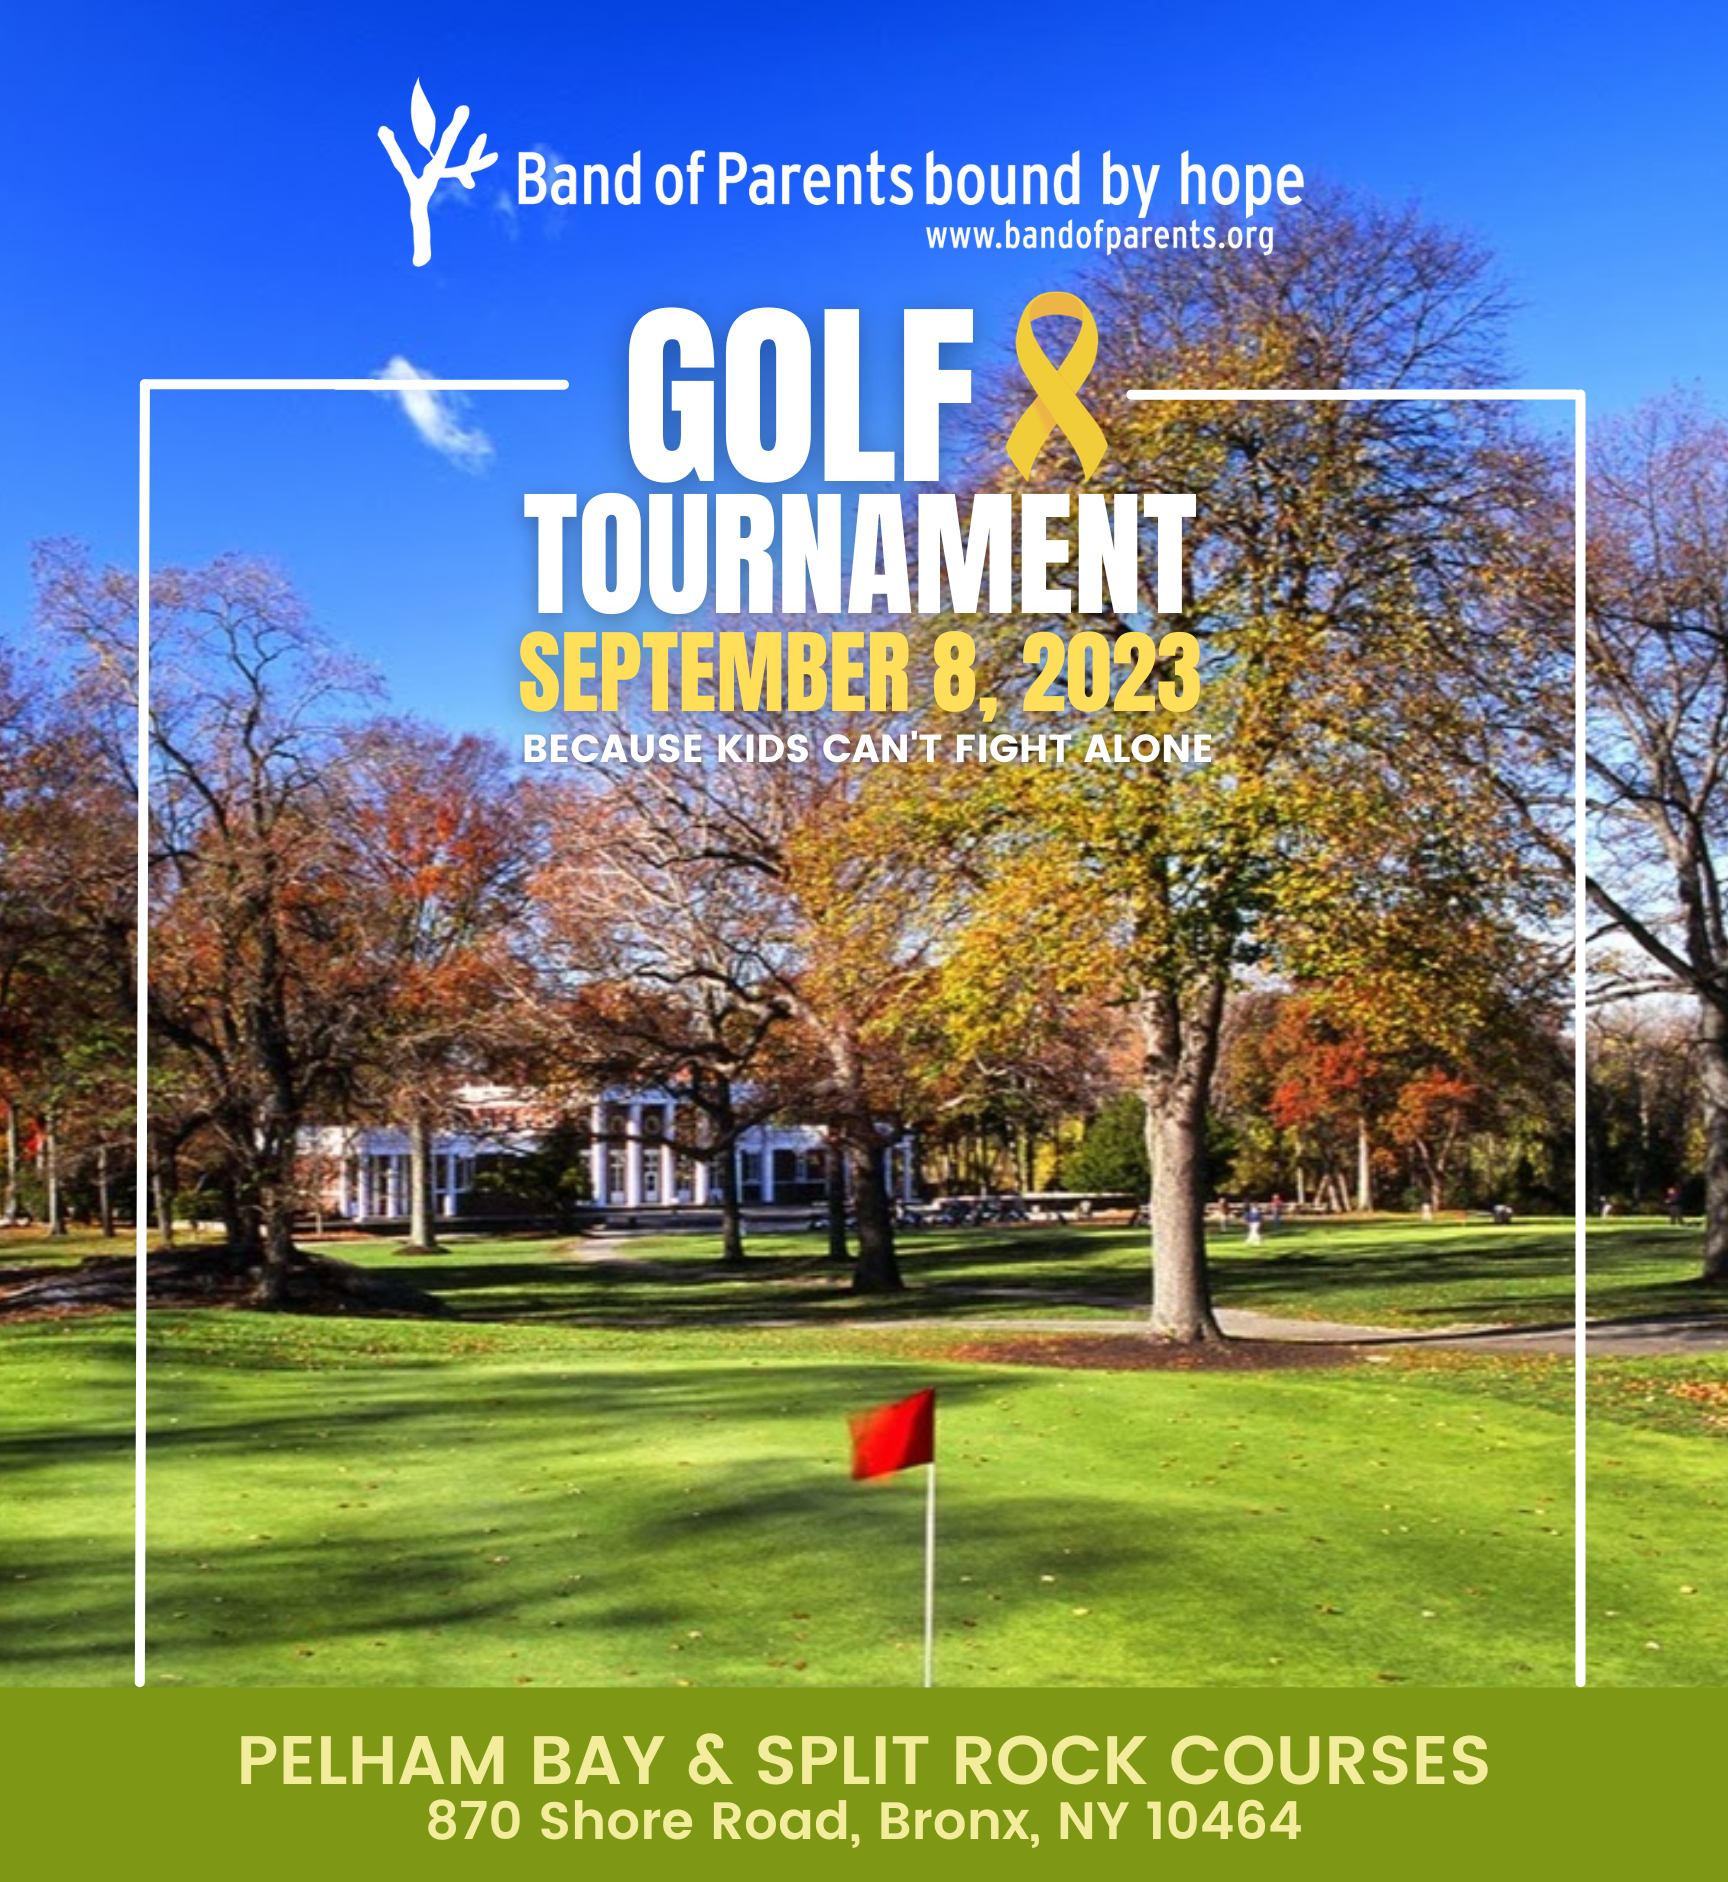 Charity Golf Tournament to Benefit Childhood Cancer Research